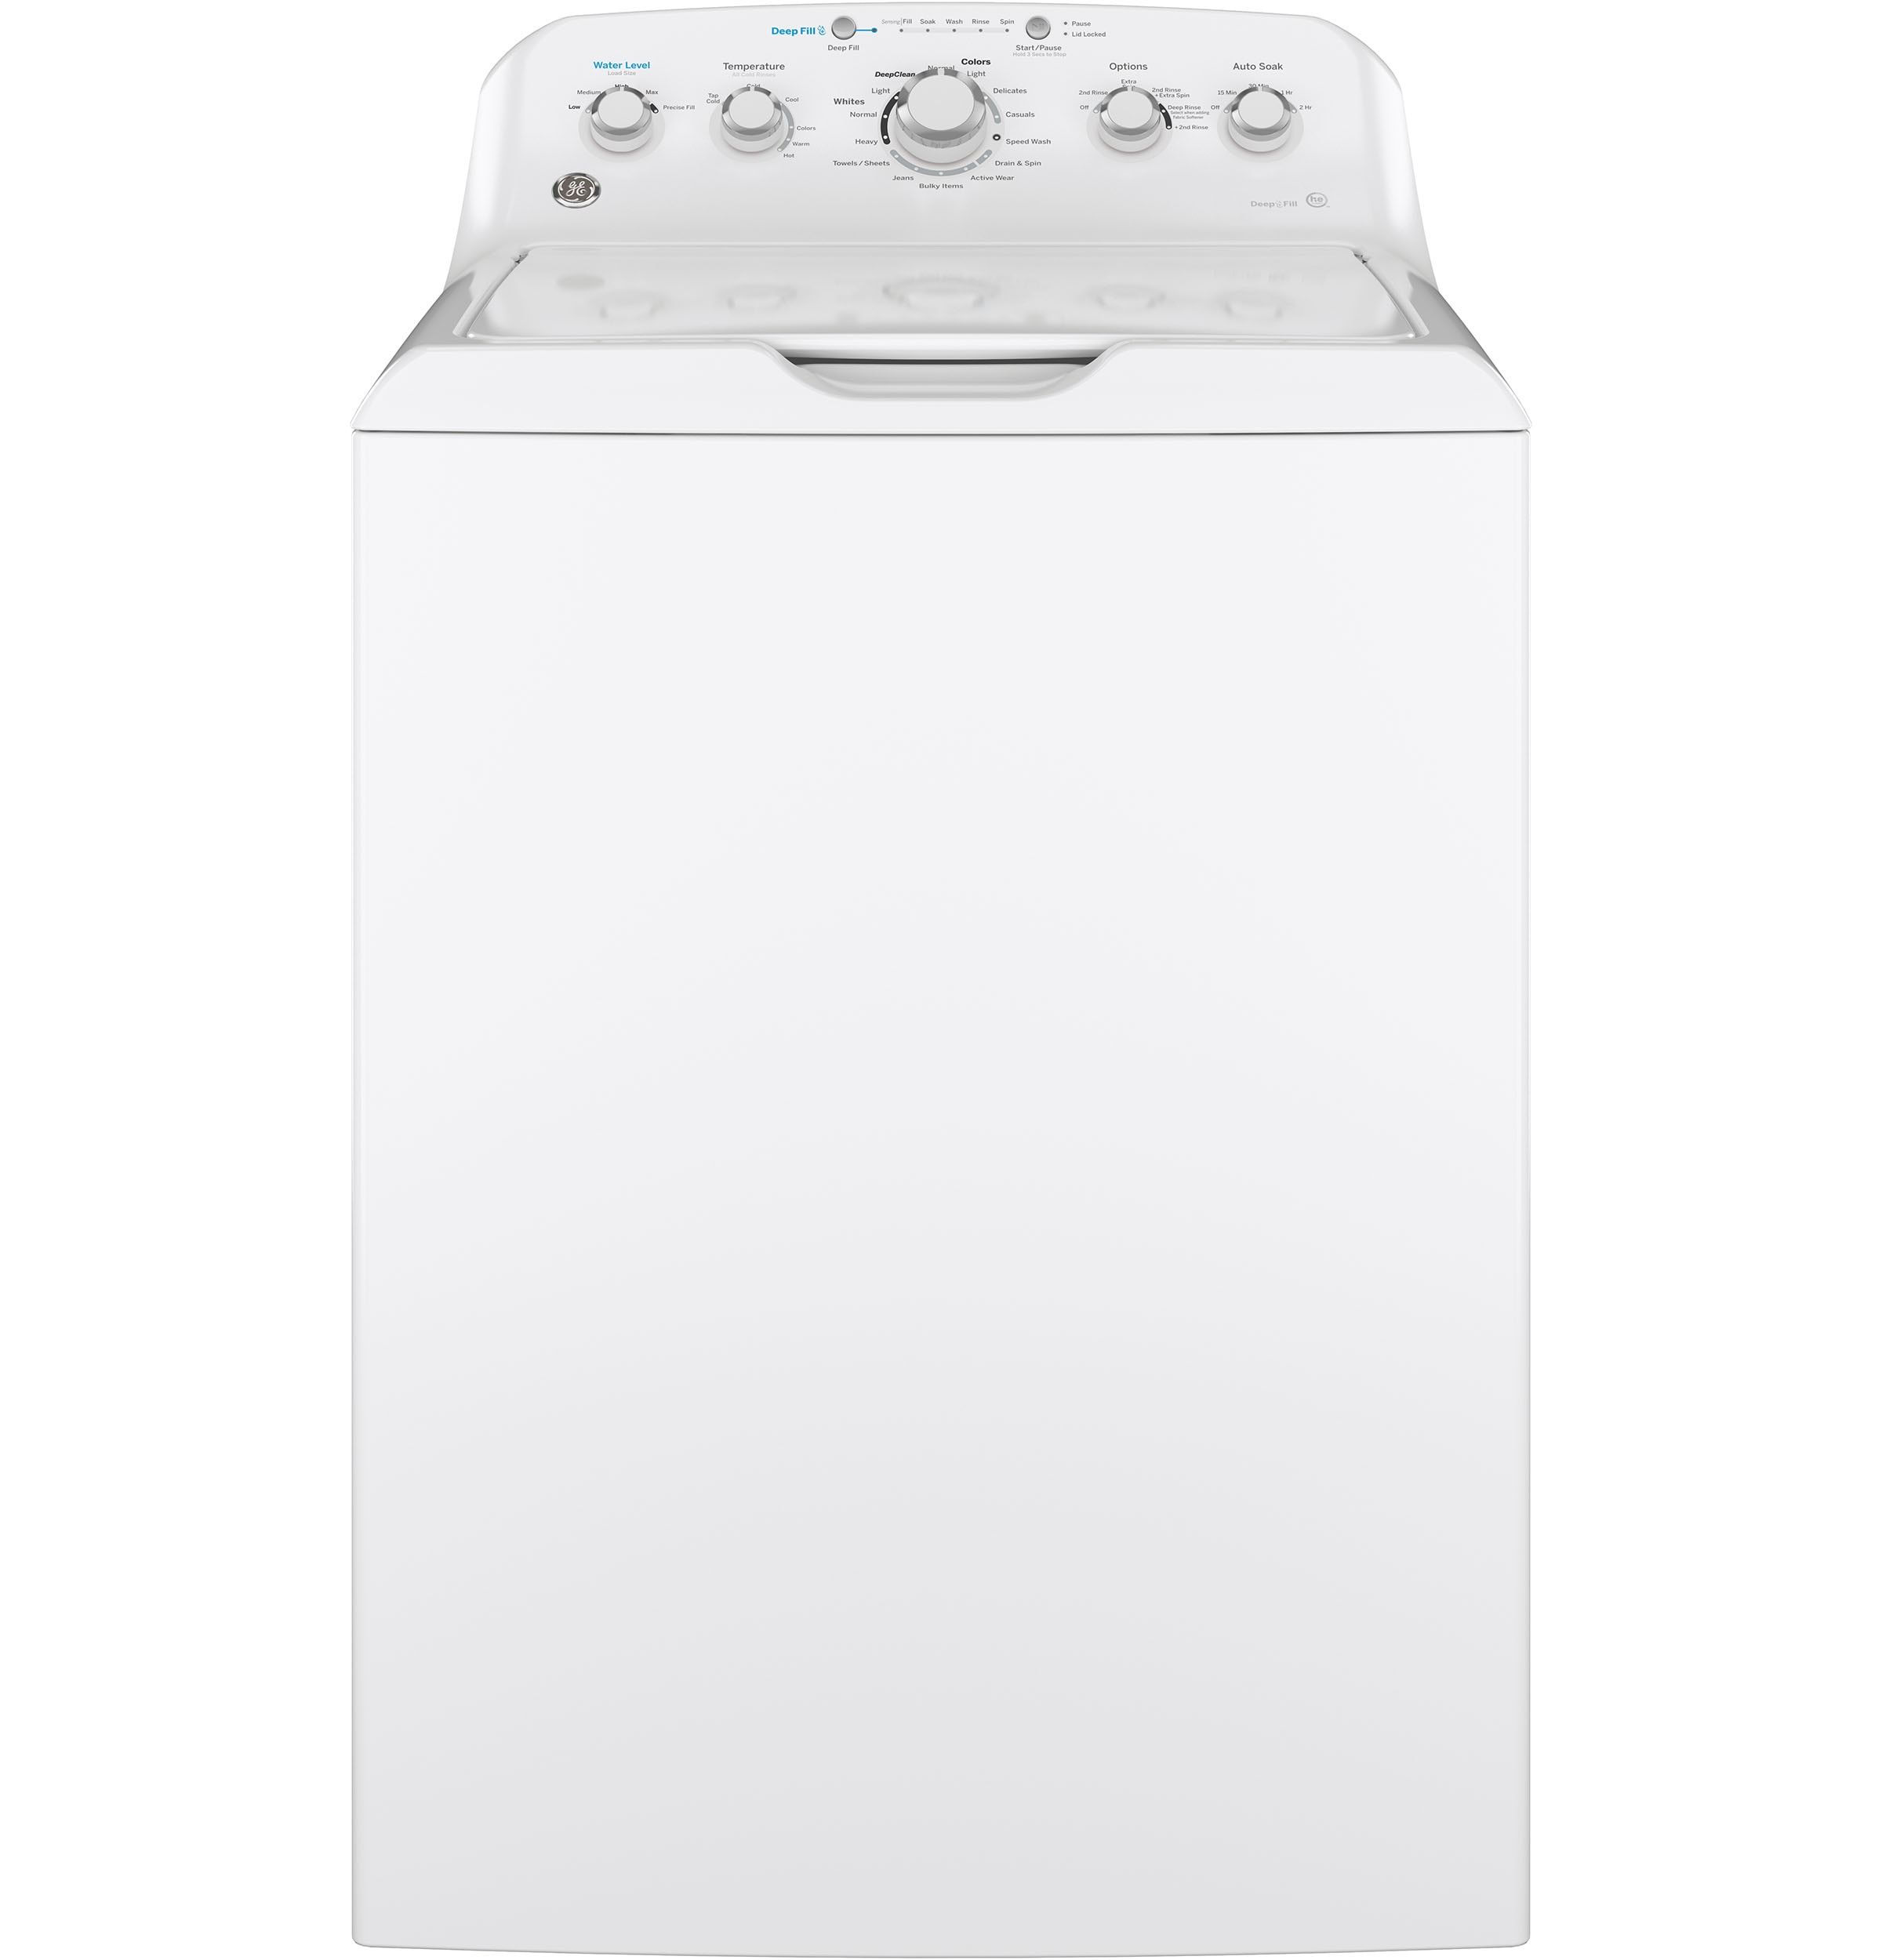 GE 4.5-cu ft High Efficiency Top-Load Washer